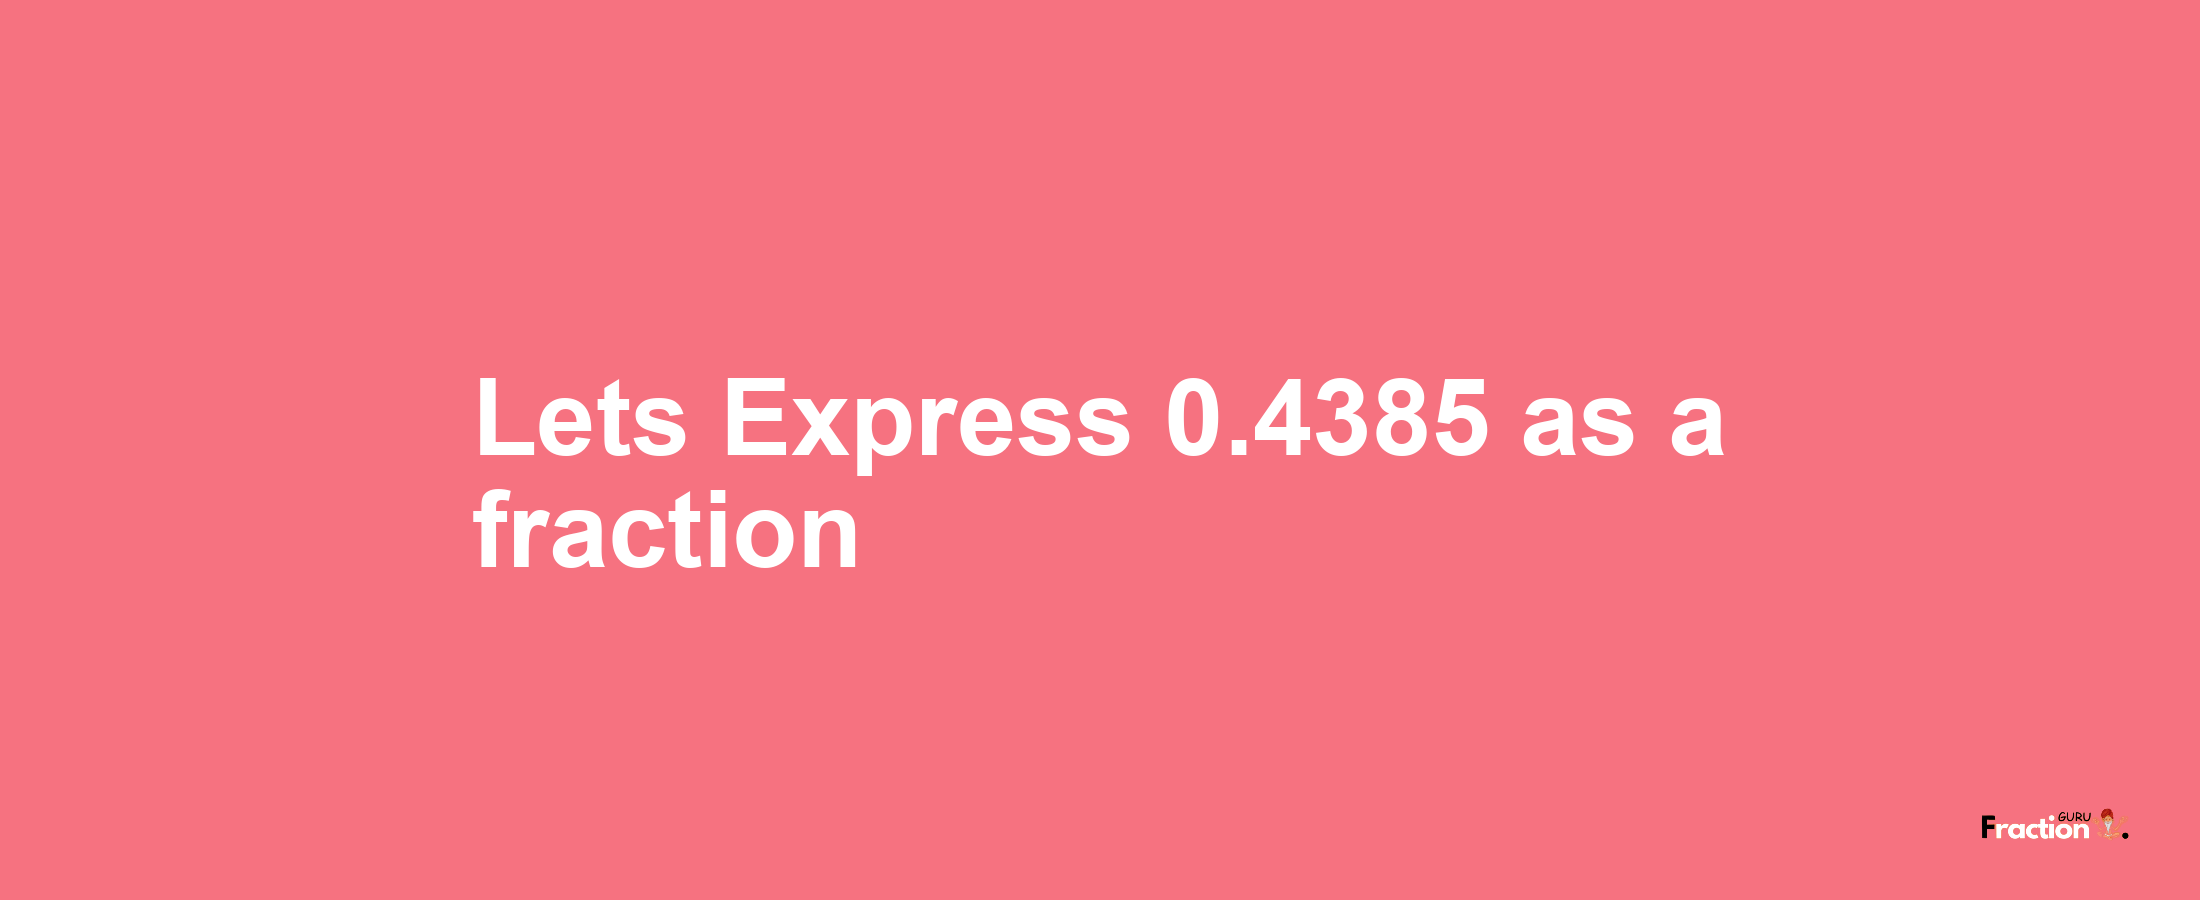 Lets Express 0.4385 as afraction